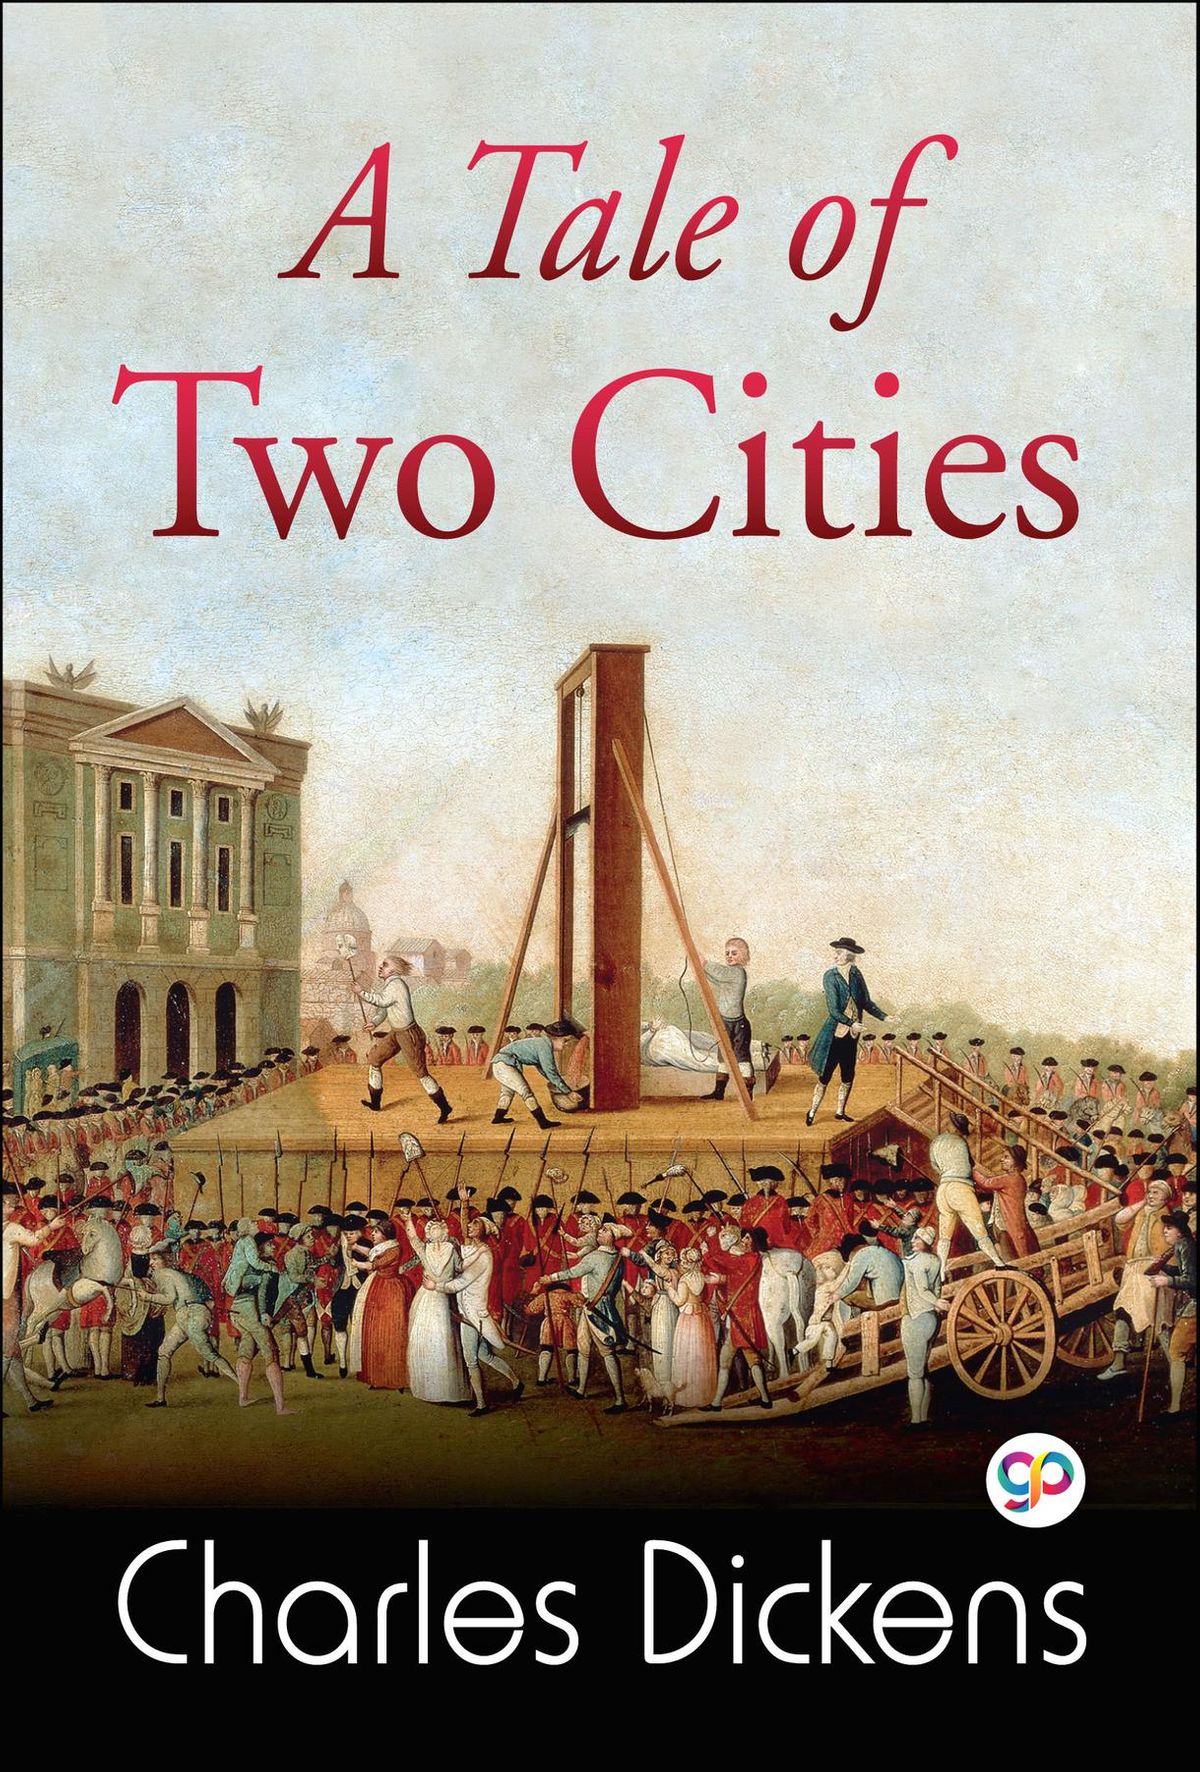 book review of the tale of two cities